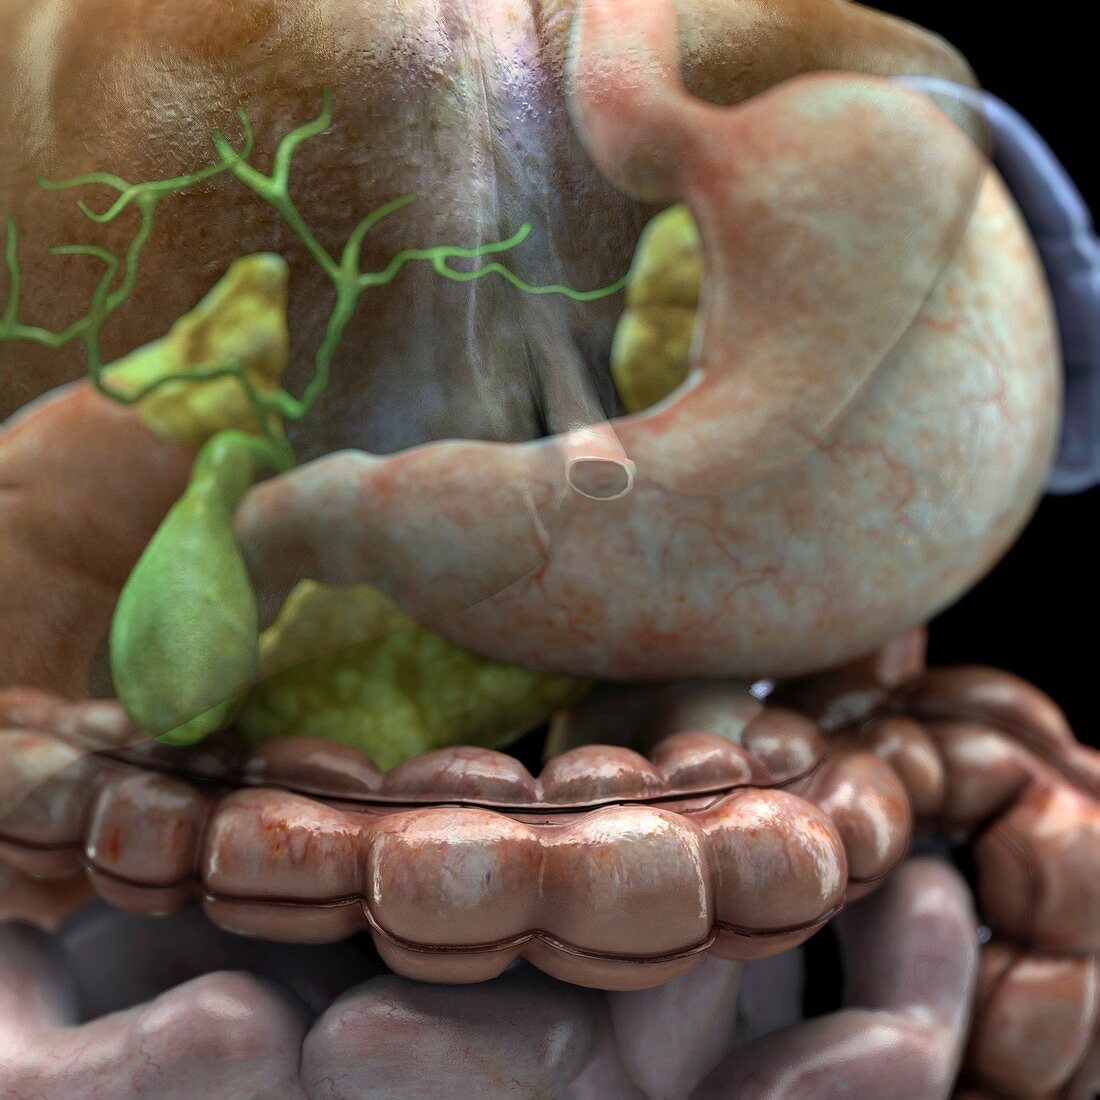 The Gallbladder and Stomach, artwork